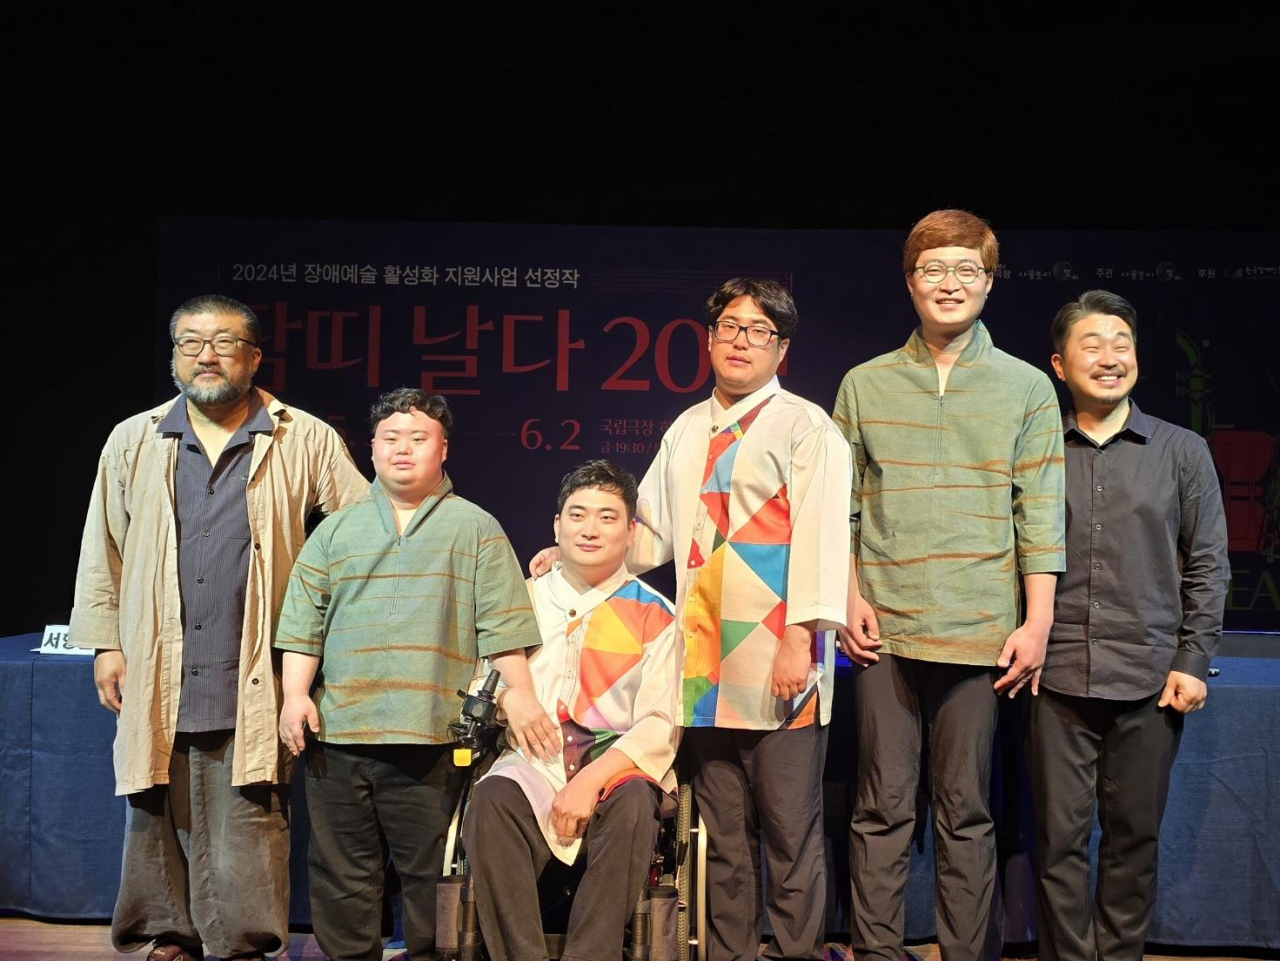 From left, director Seo Hyung-won, members of Samulnori Ttamtti and music director Song Kyong-keun pose for a group photo after a rehearsal at the National Theater of Korea, on May 9. (Yonhap)